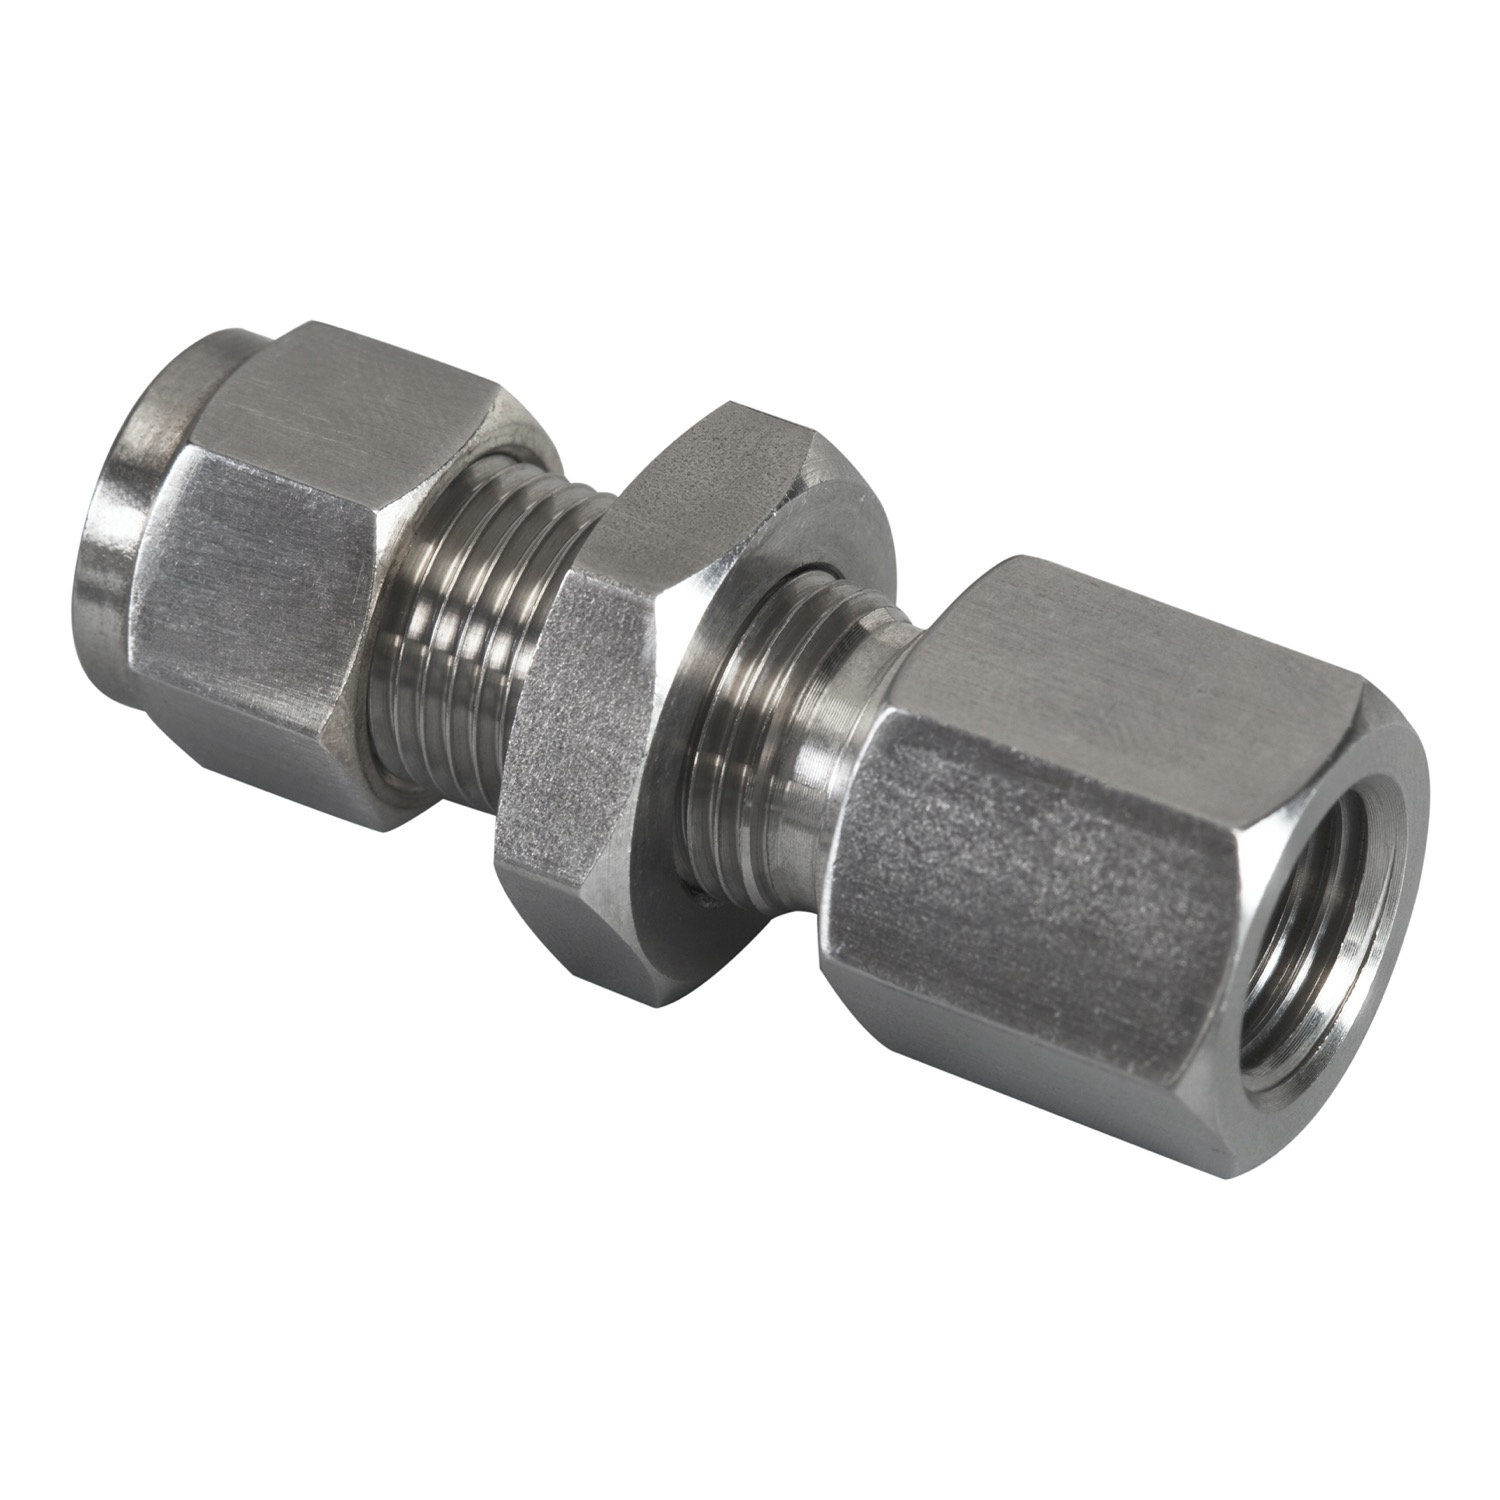 Connector - Bulkhead, Compression Fittings, N2705-LN Series